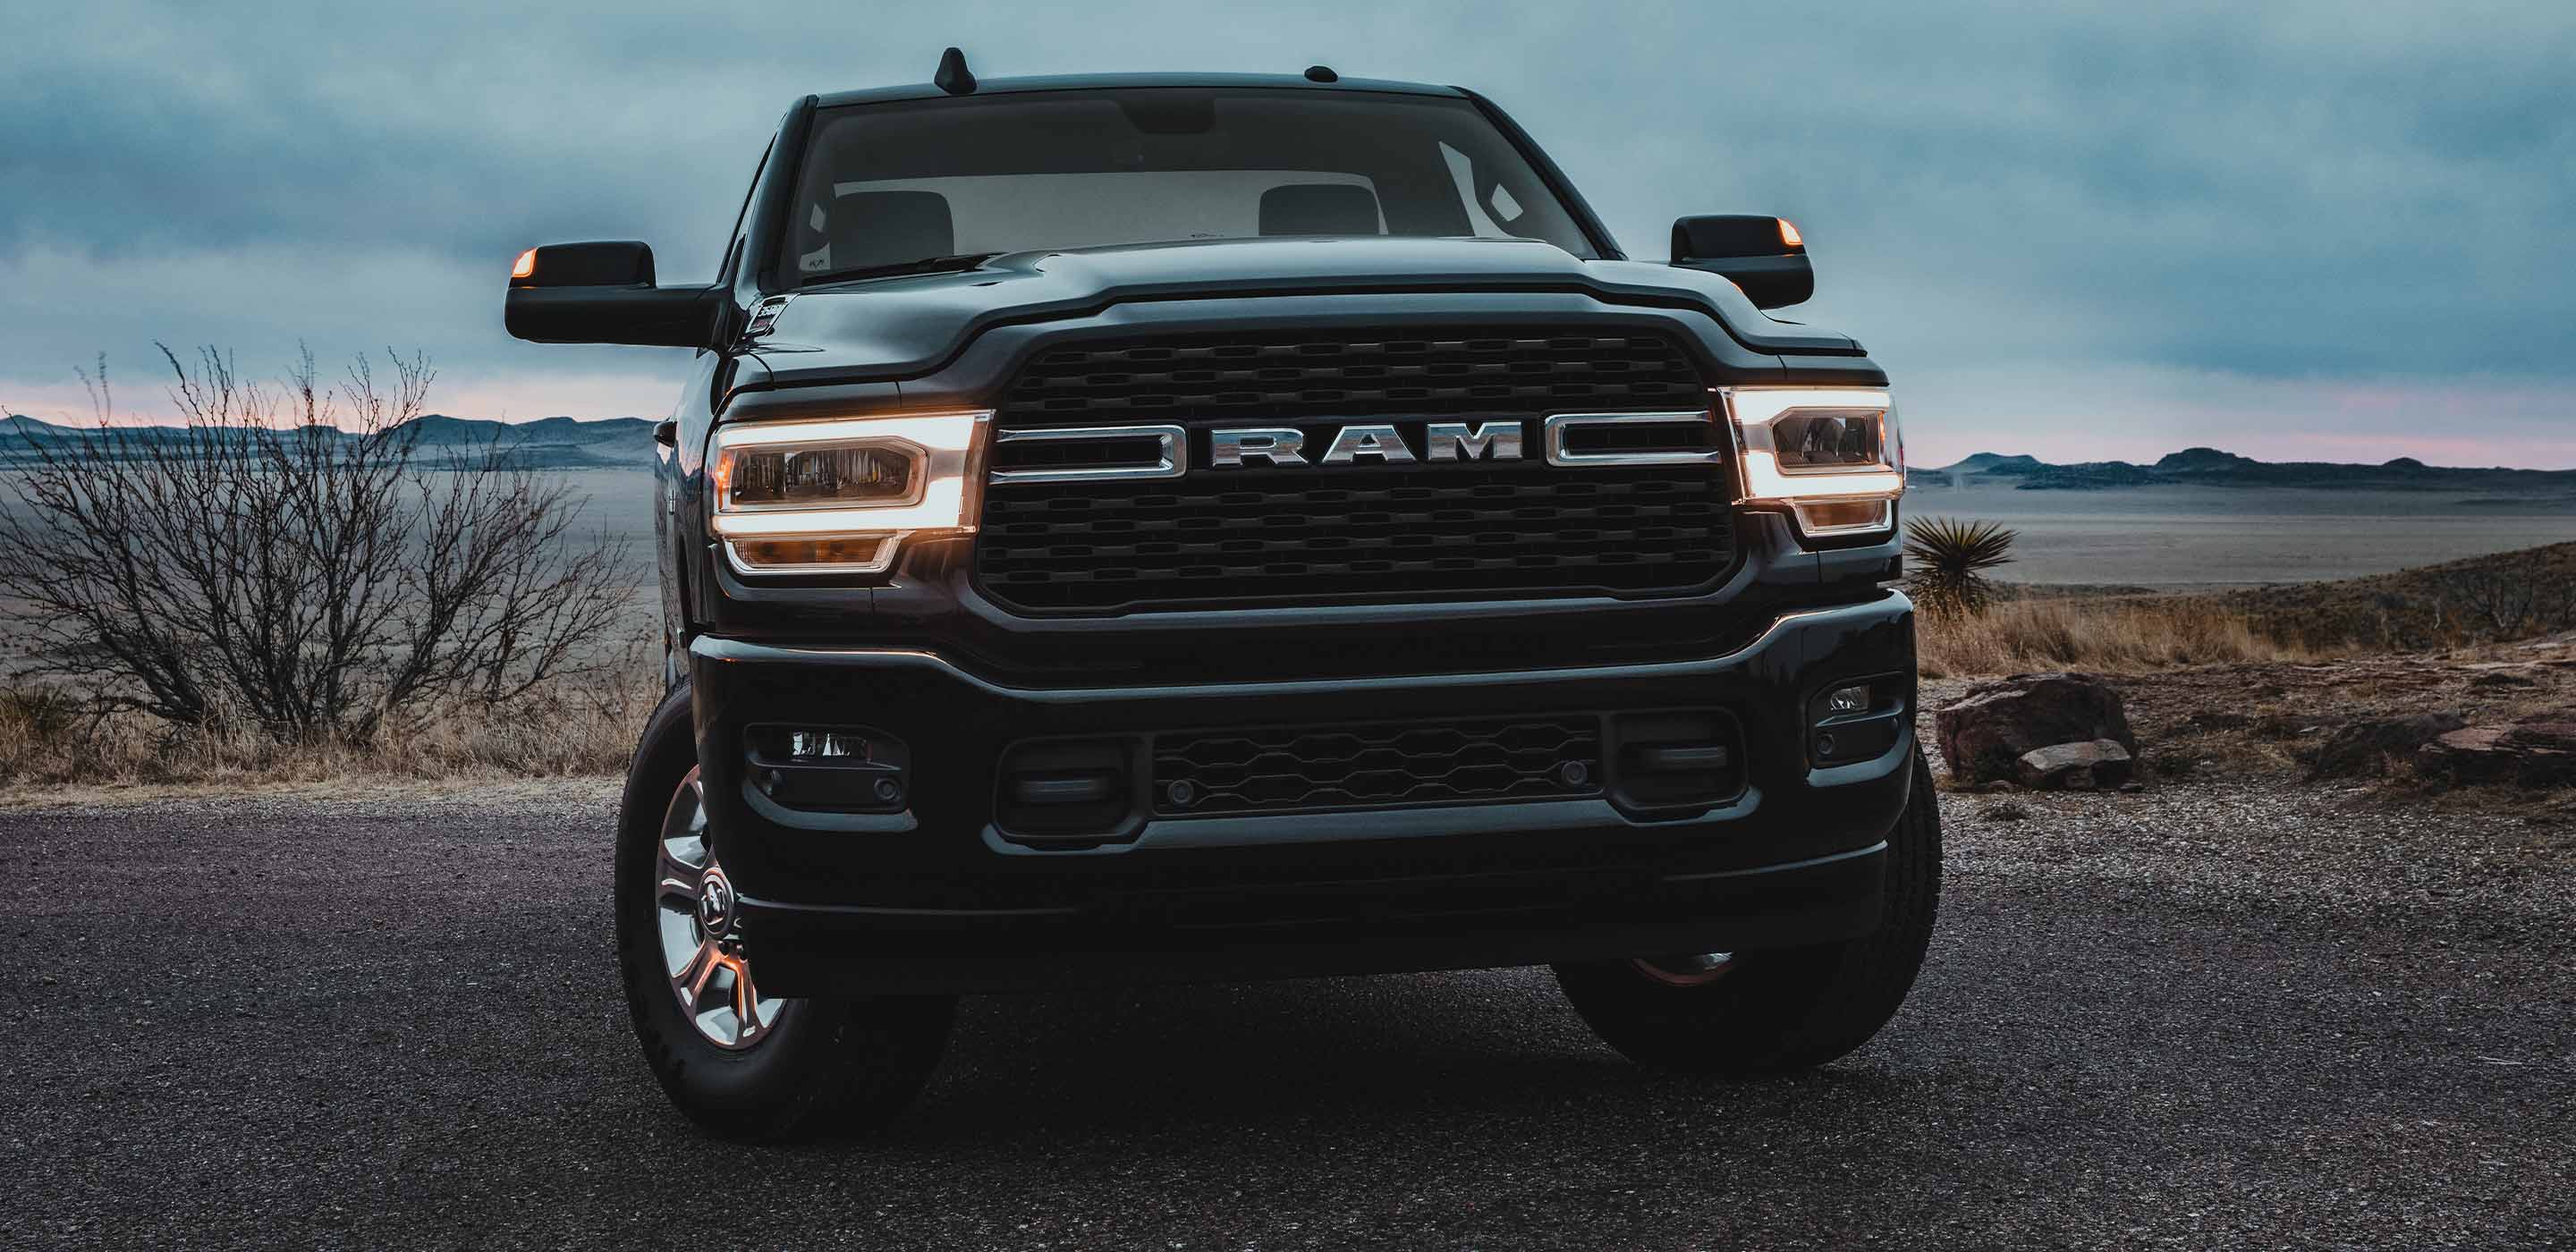 Display A head-on view of the 2022 Ram 3500 with its headlamps lit.